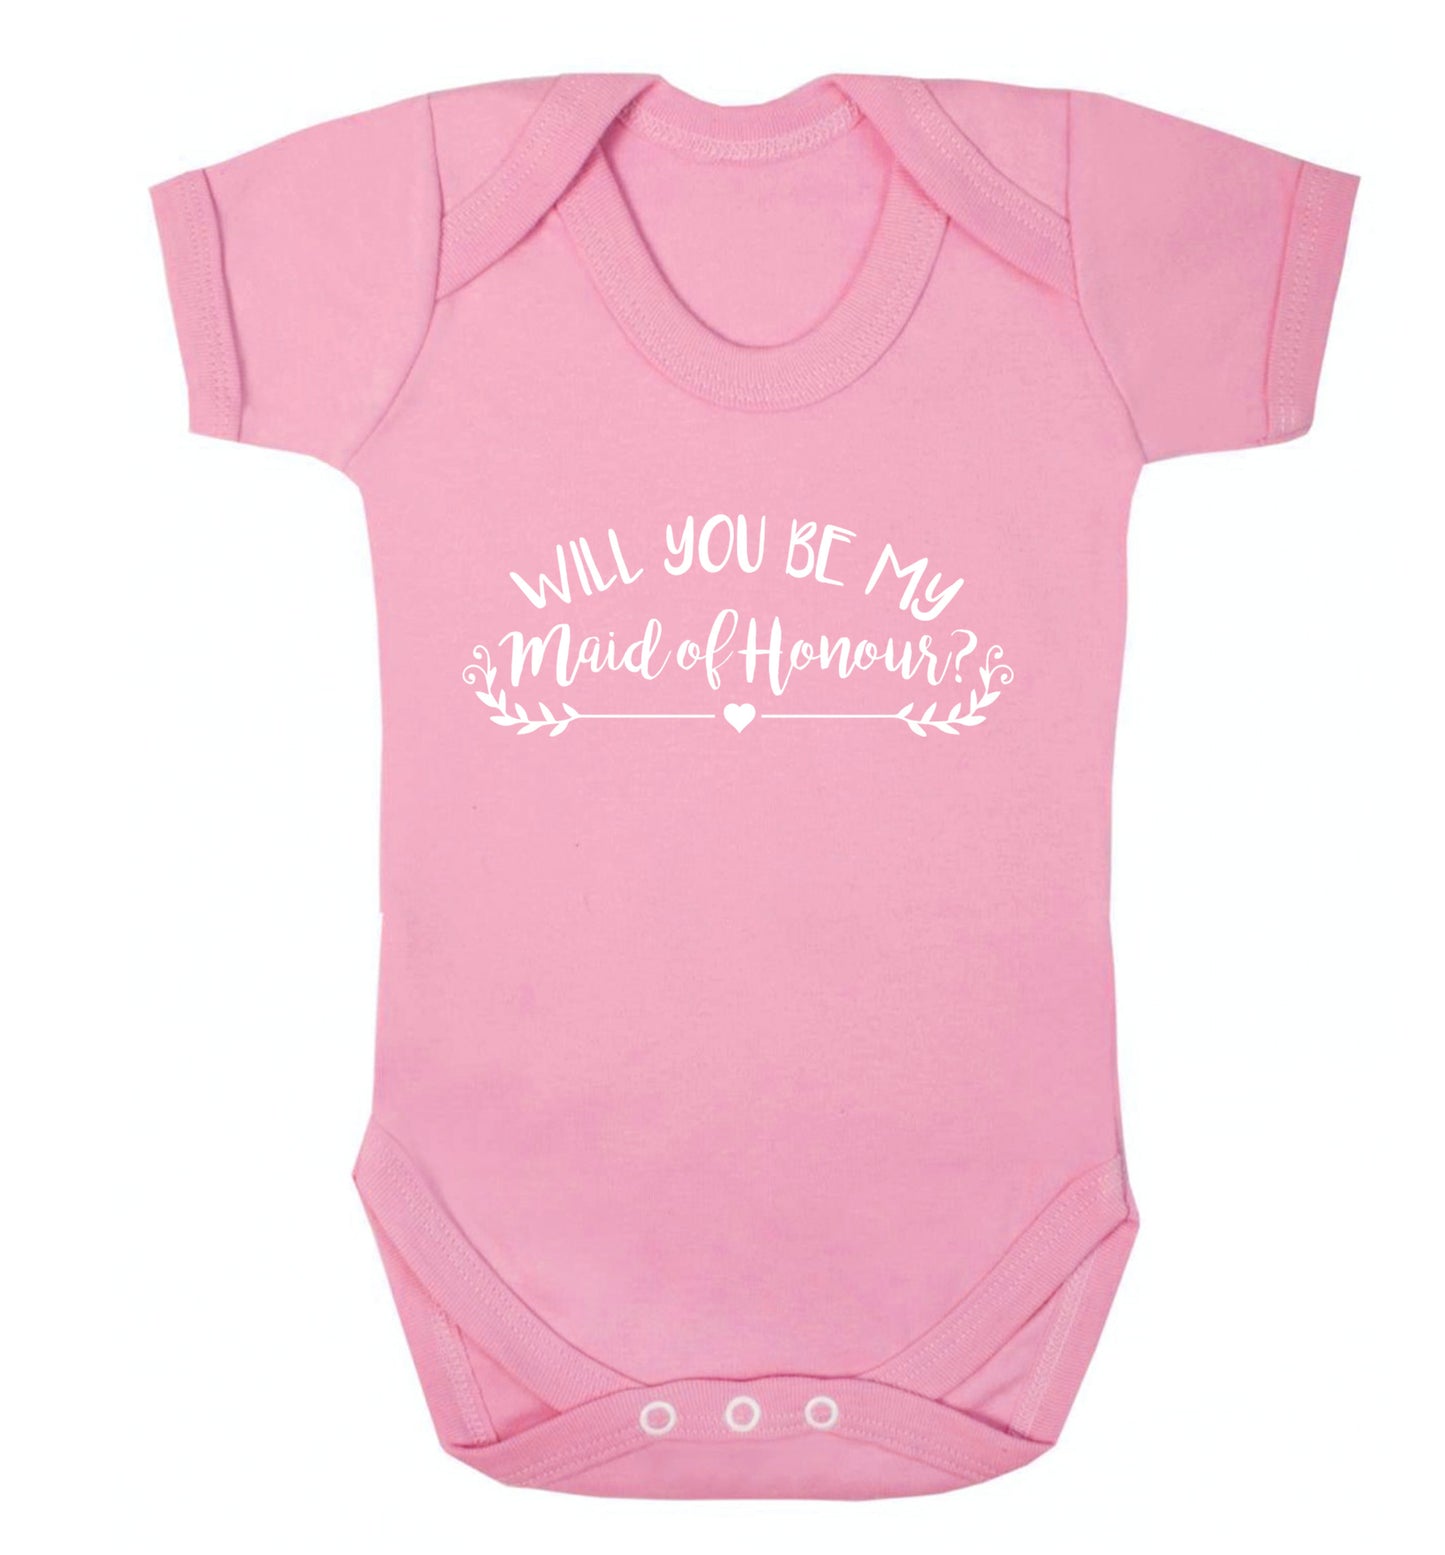 Will you be my maid of honour? Baby Vest pale pink 18-24 months